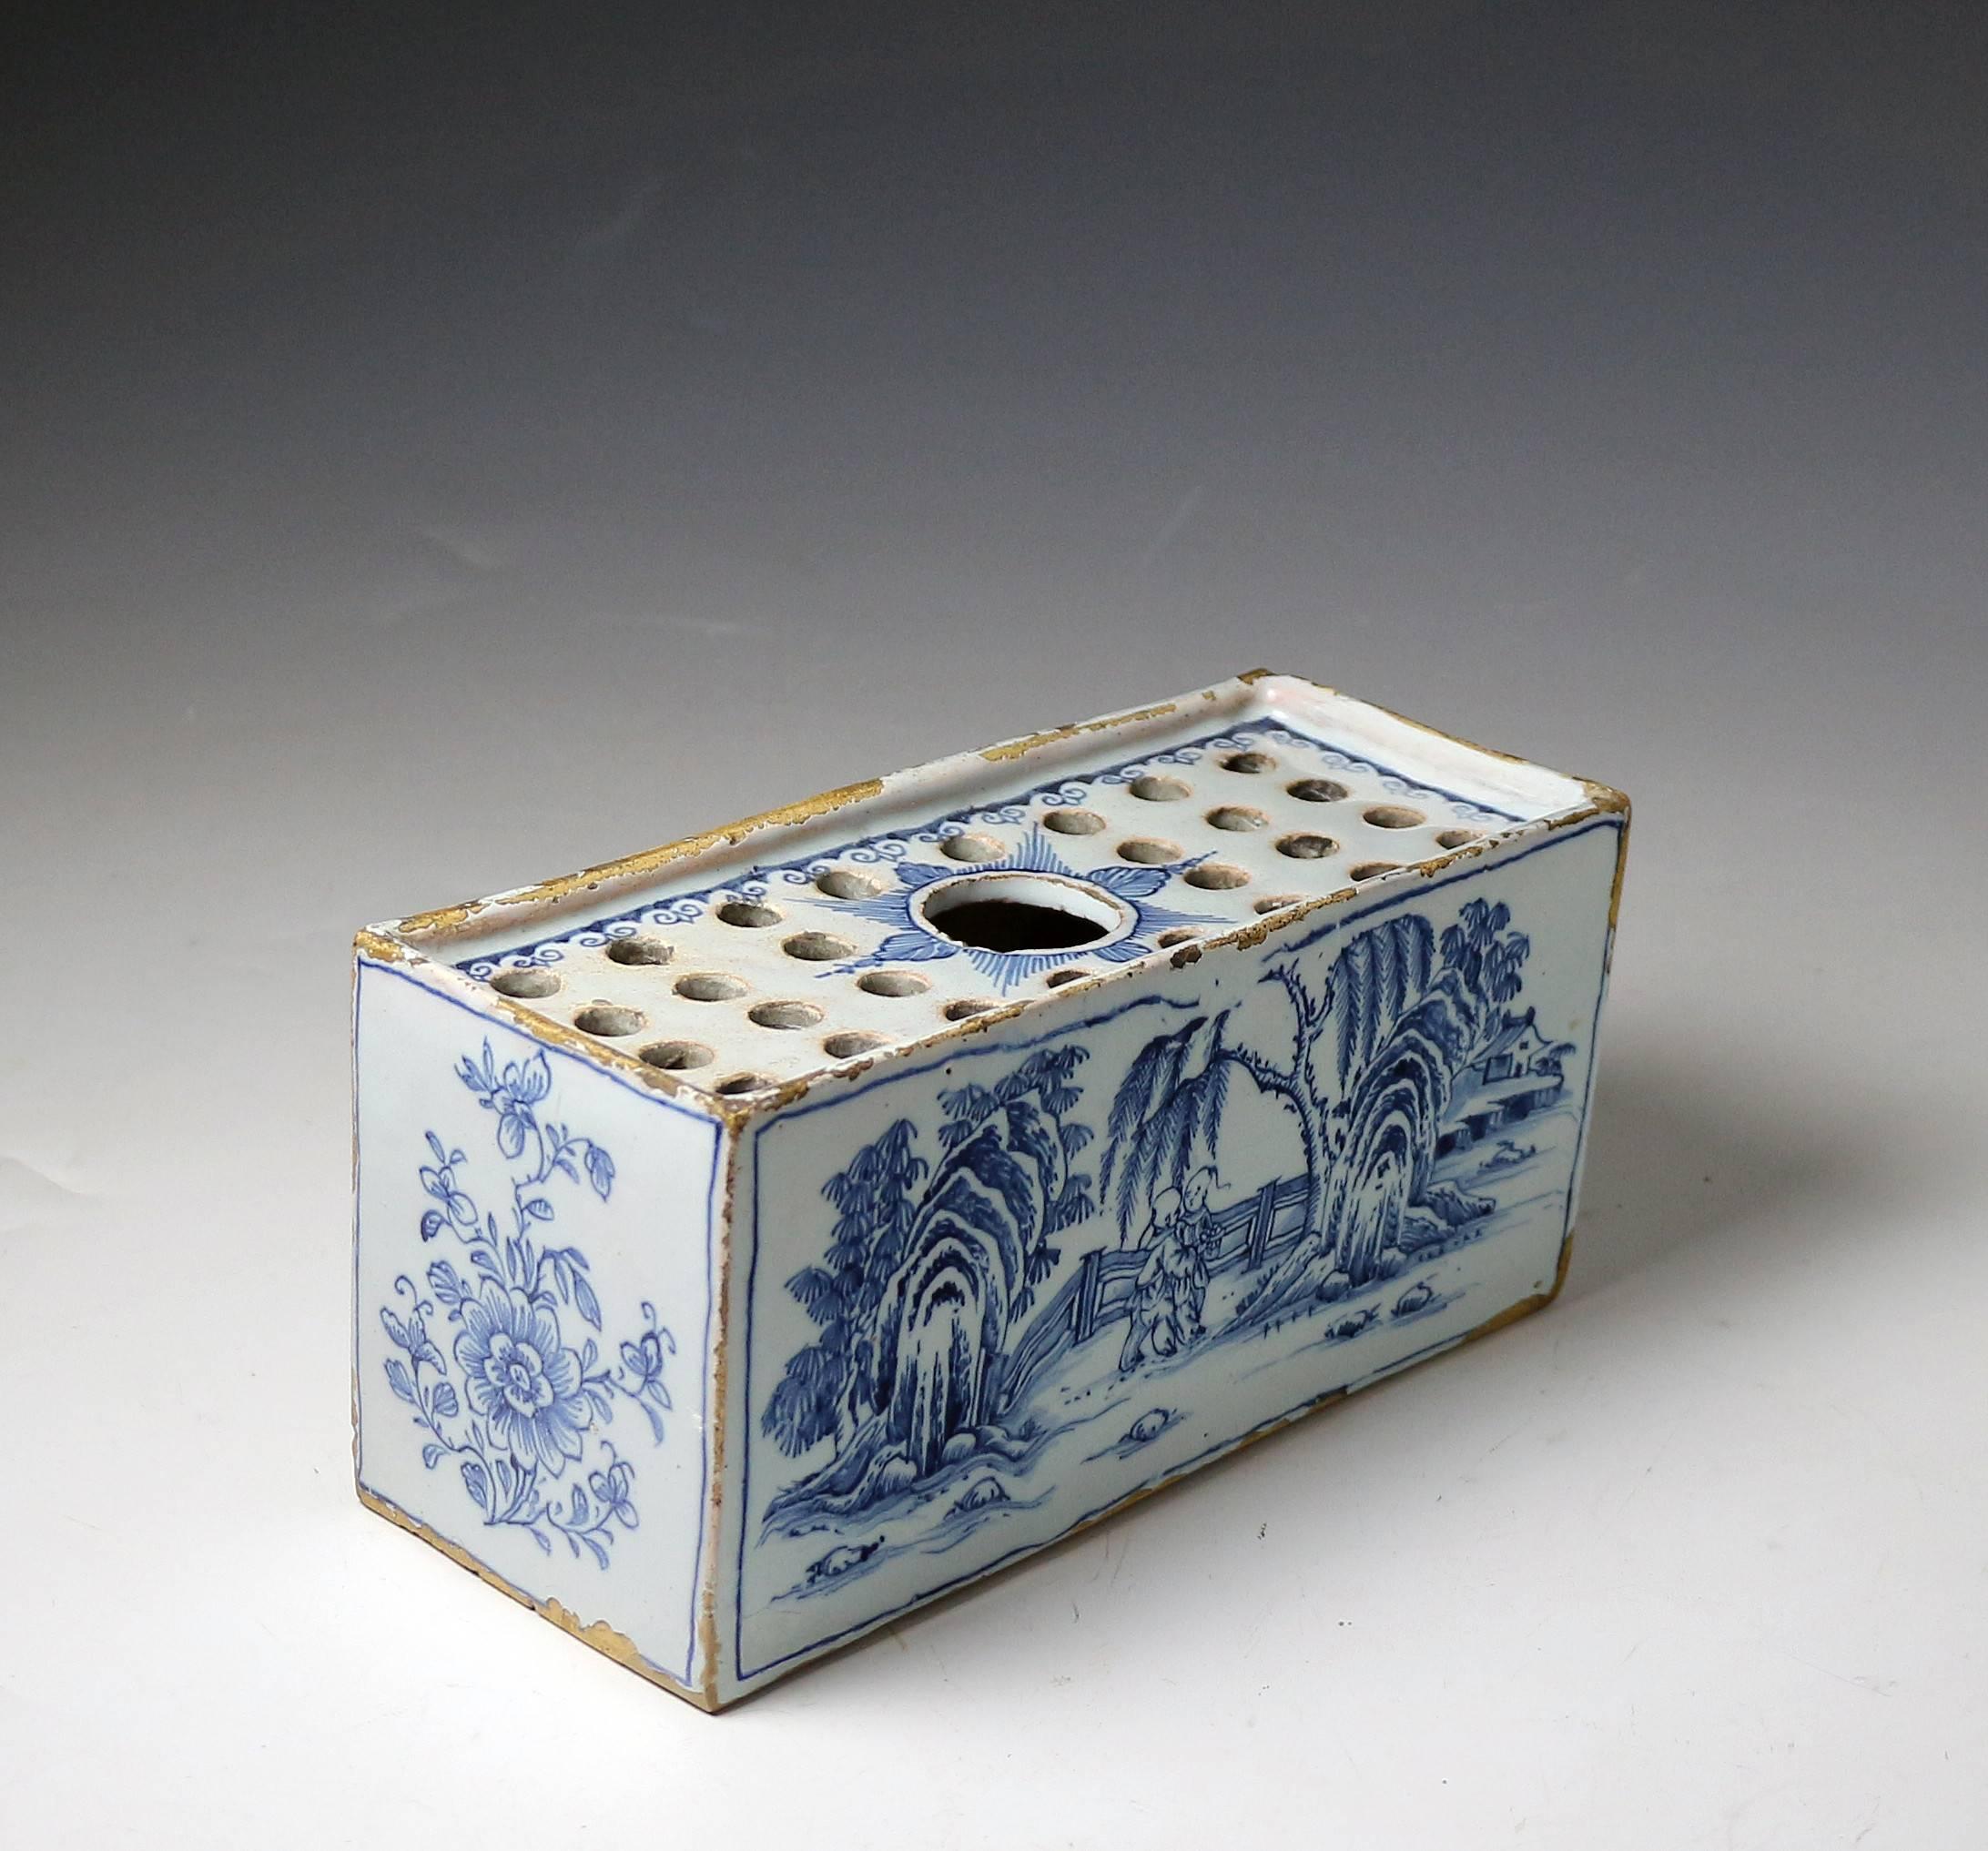 A good size English delftware pottery flower brick decorated in the Chinoiserie style in blue and white.